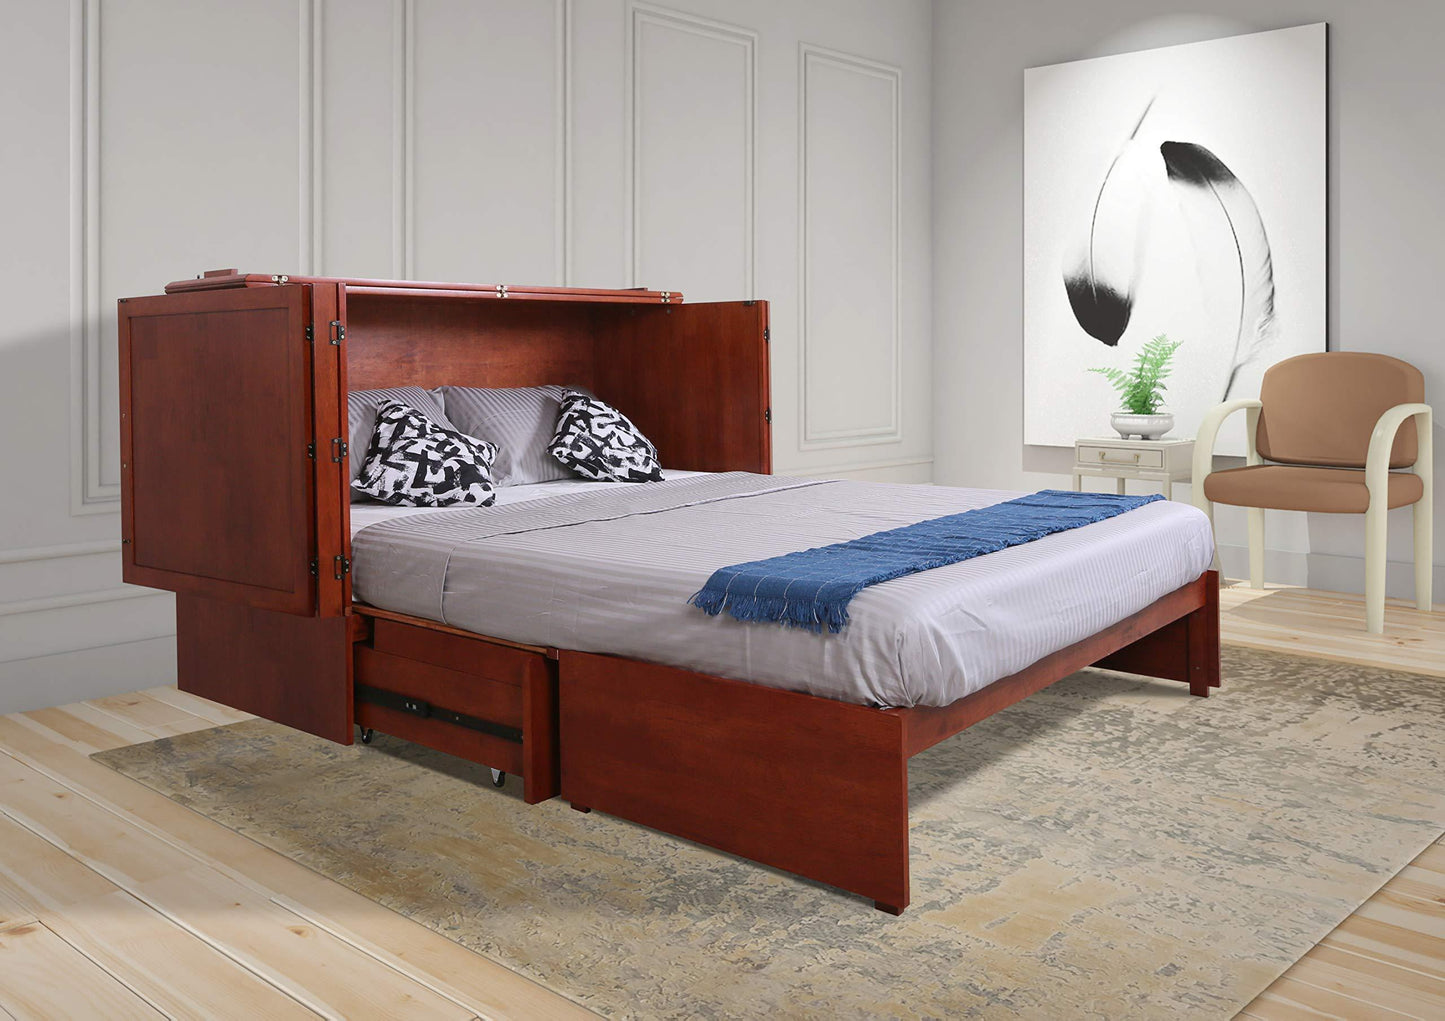 Save on emurphybed com daily delight charging station gel infused mattress solid wood murphy cabinet chest bed queen cherry